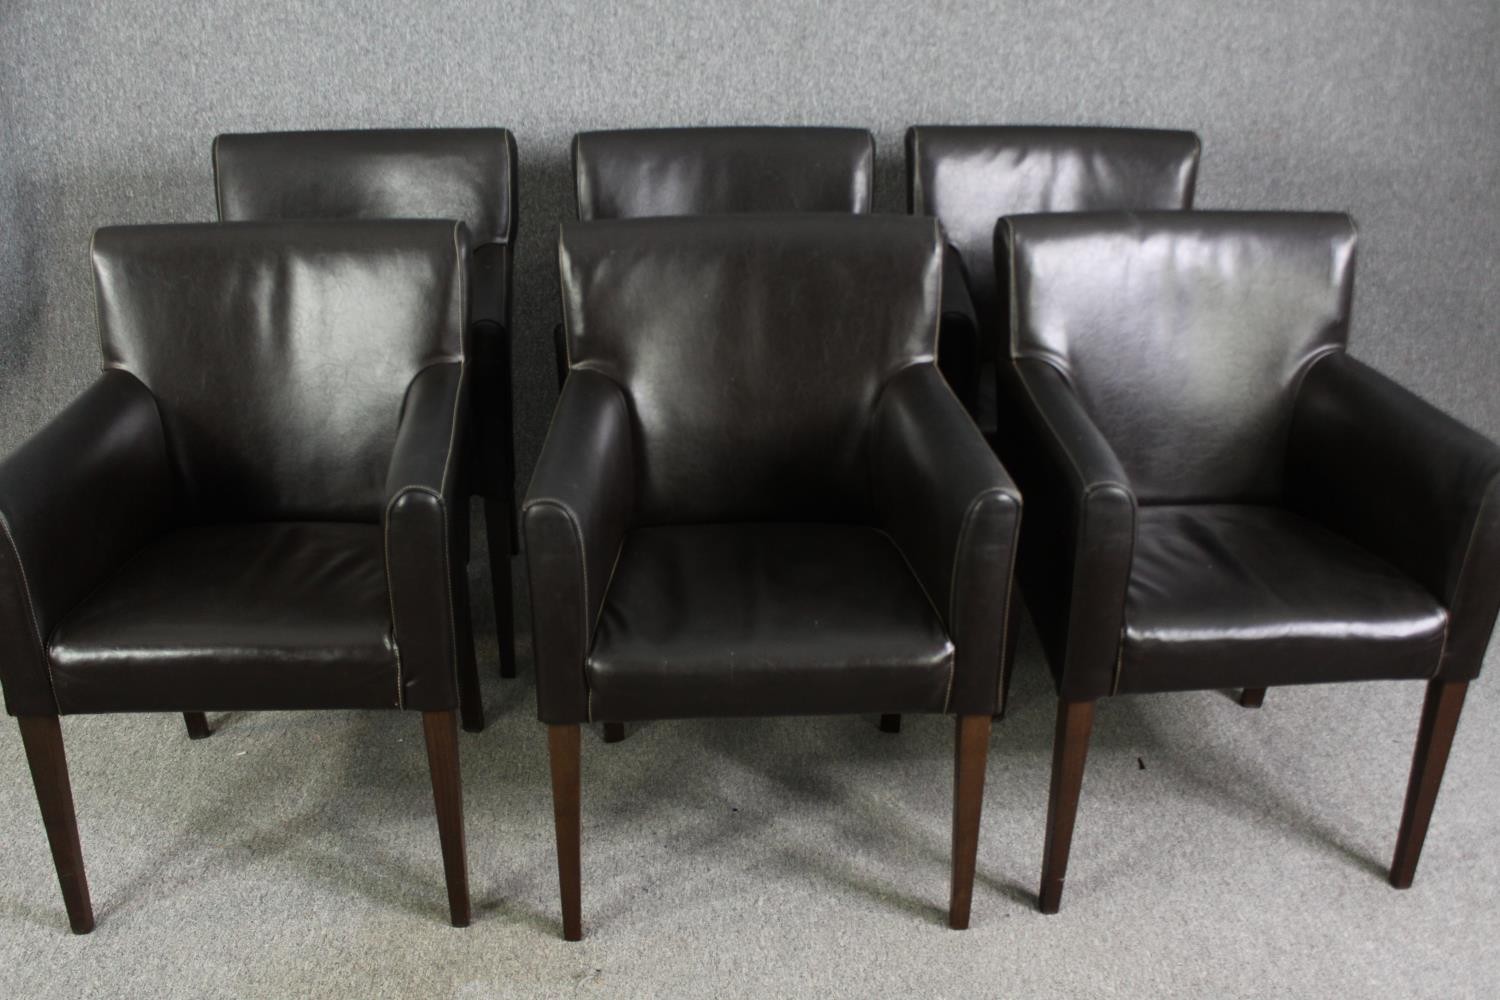 A set of six leatherette upholstered dining chairs.